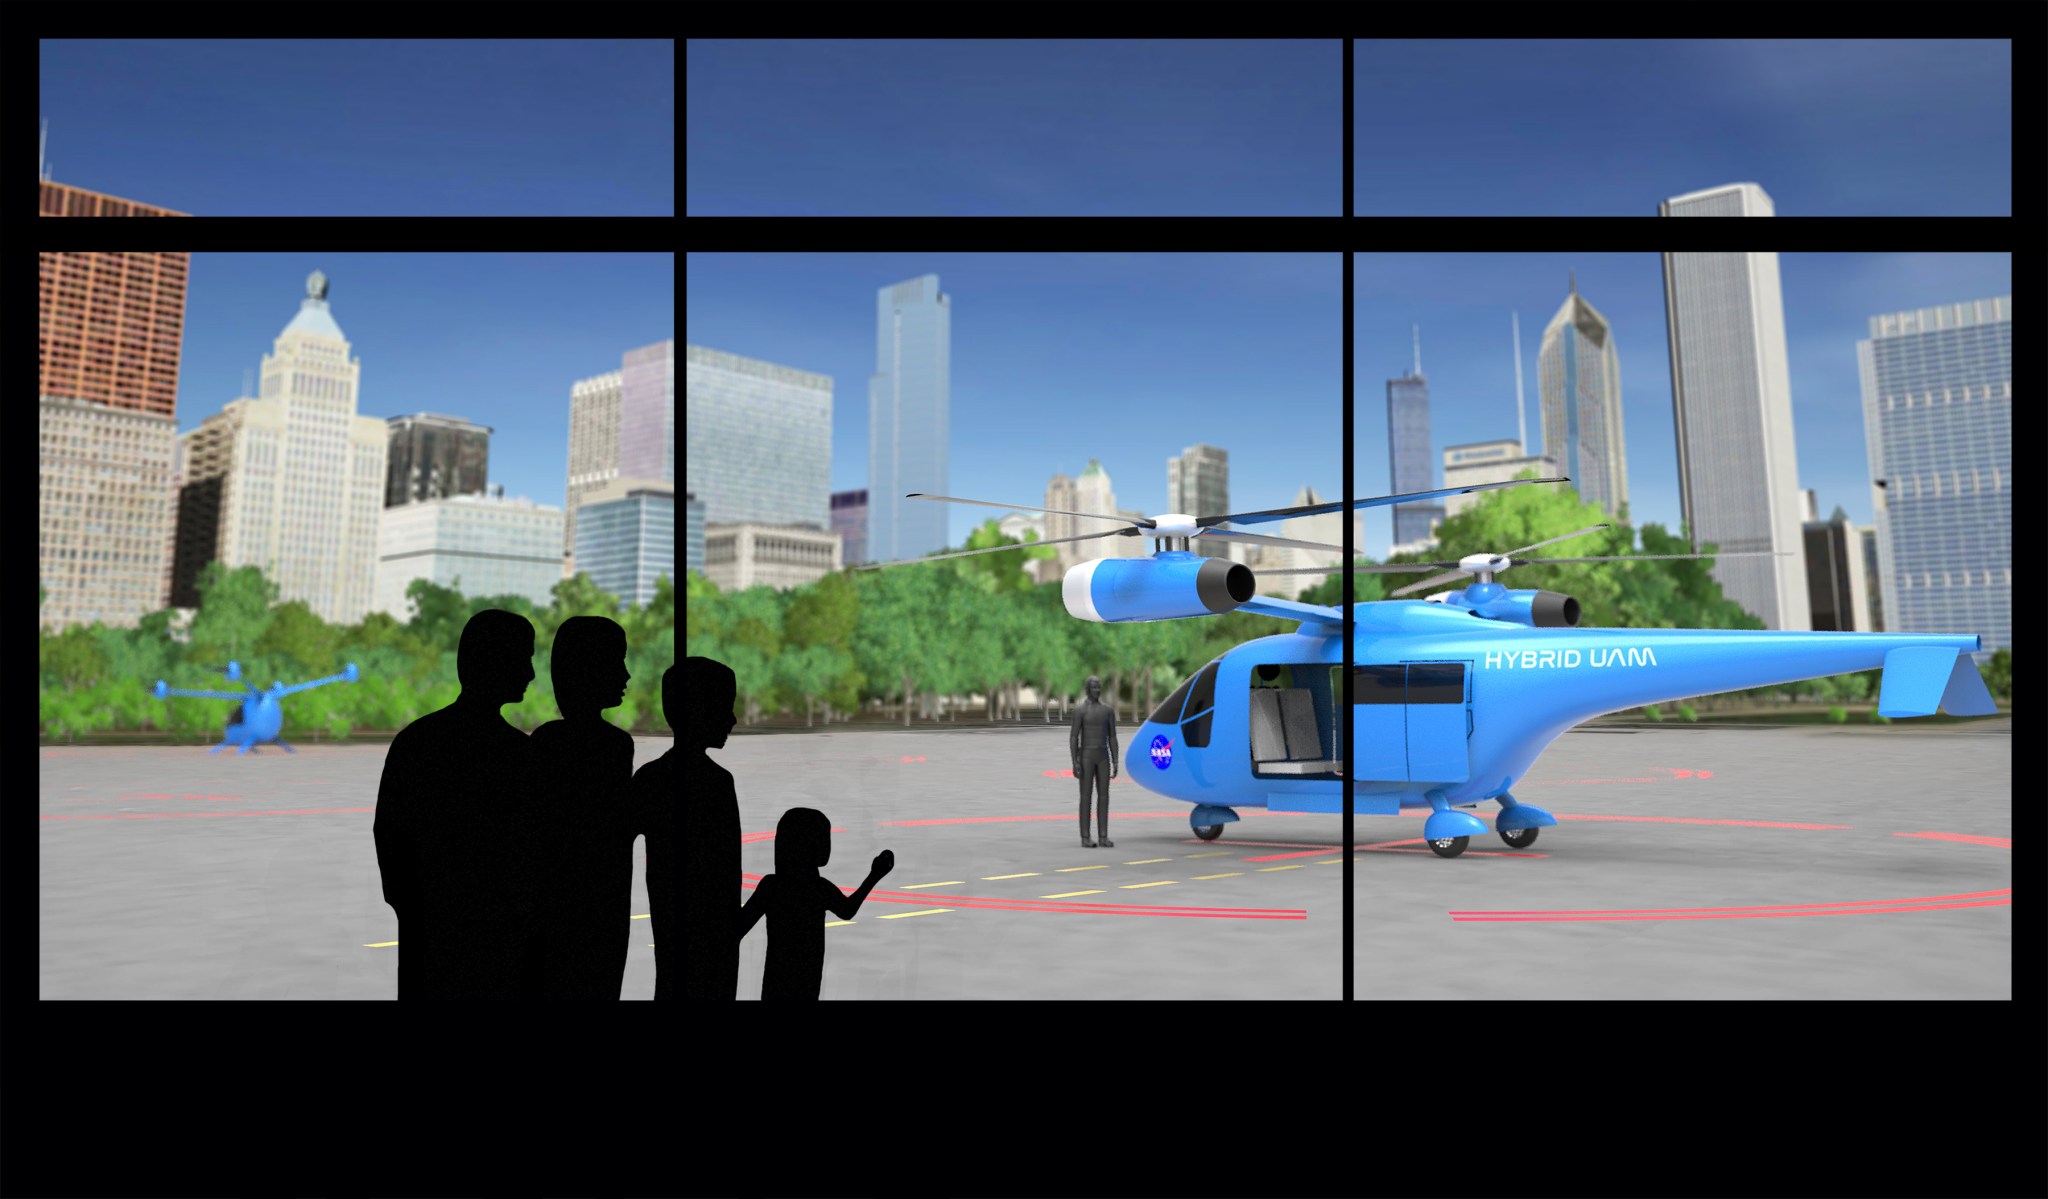 Artist illustration of a family inside a vertiport waiting to get onto the Hybrid UAM.